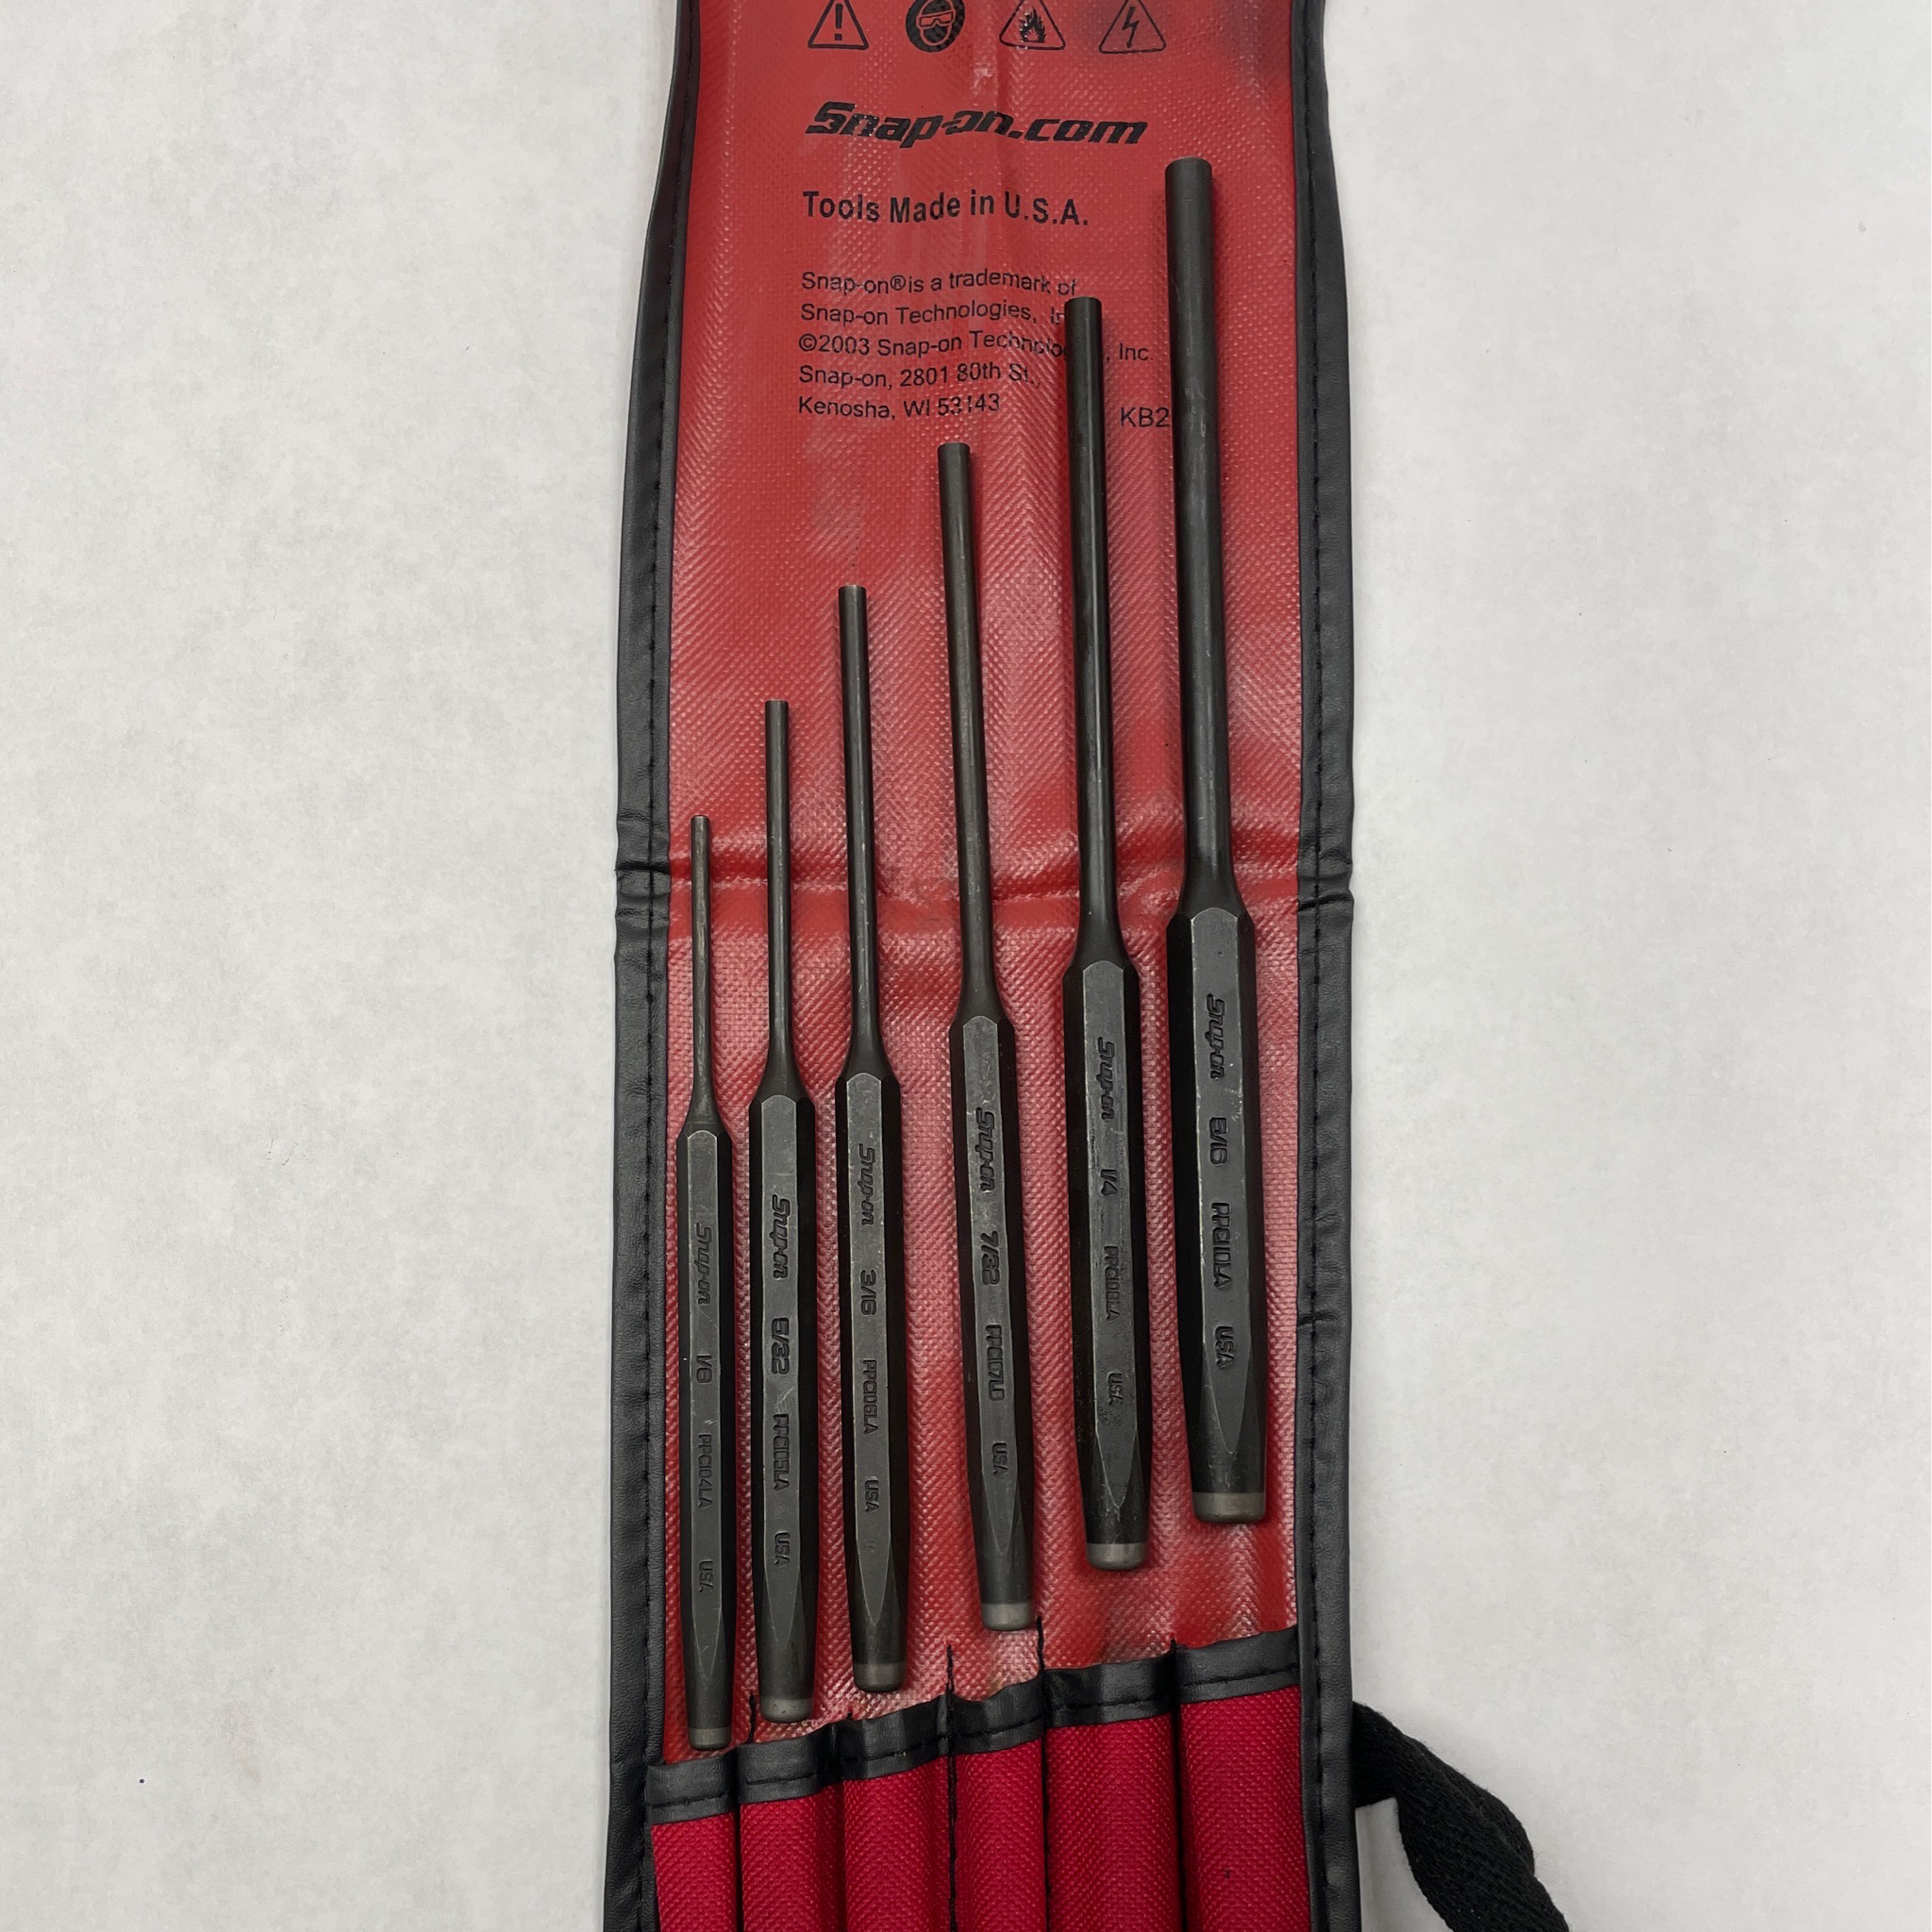 Snap-on 6pc Punch Set Pouch C-64b Made in USA for sale online